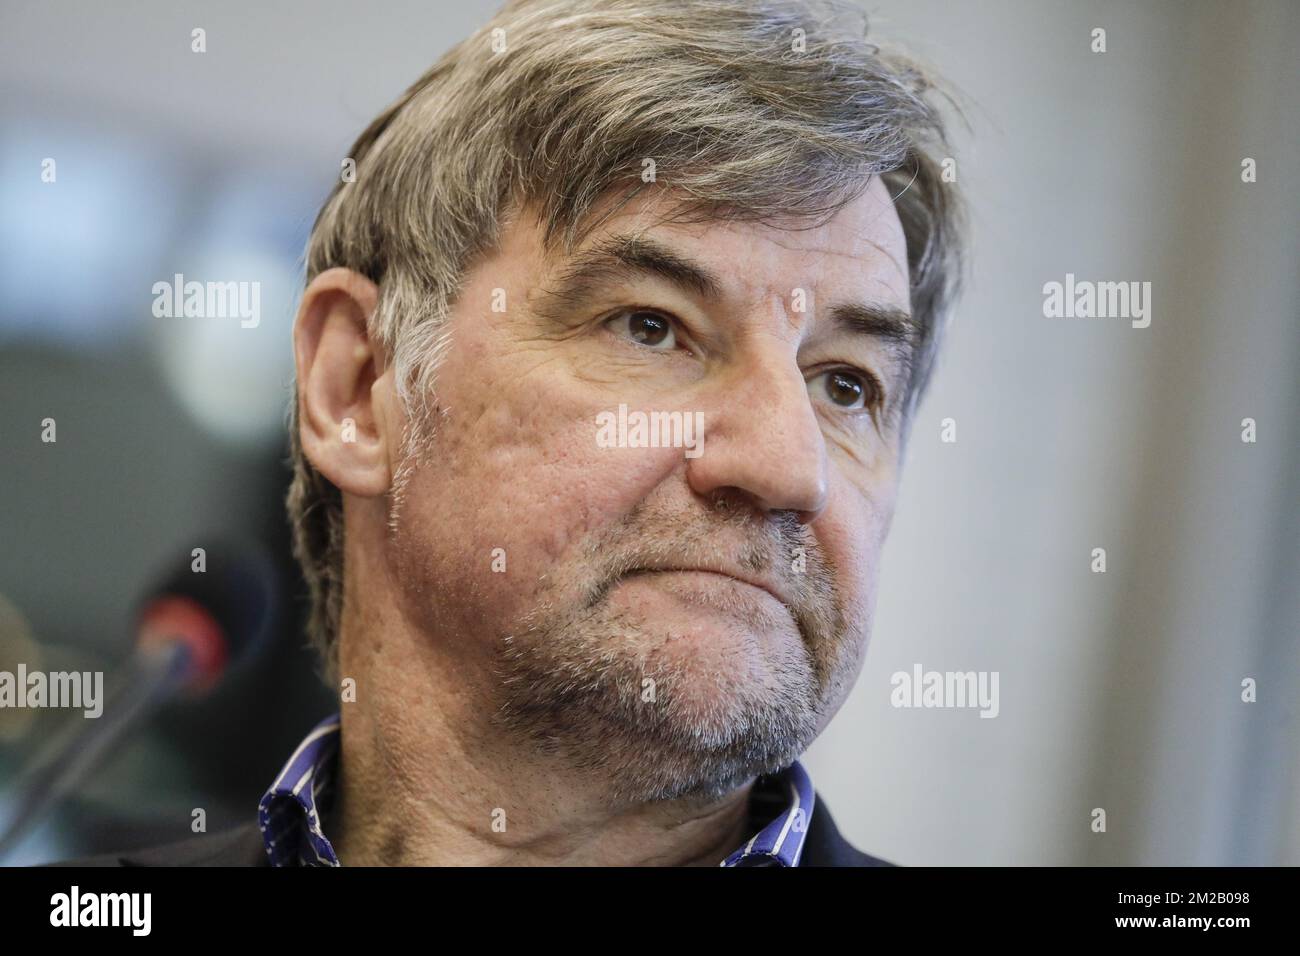 N-VA's Wilfried Vandaele pictured during a dialogue session between parliament of the Brussels Region, Flemish parliament and Walloon parliament on climate ahead of COP23 climate top in Bonn later this month, in Brussels, Monday 13 November 2017. BELGA PHOTO THIERRY ROGE Stock Photo